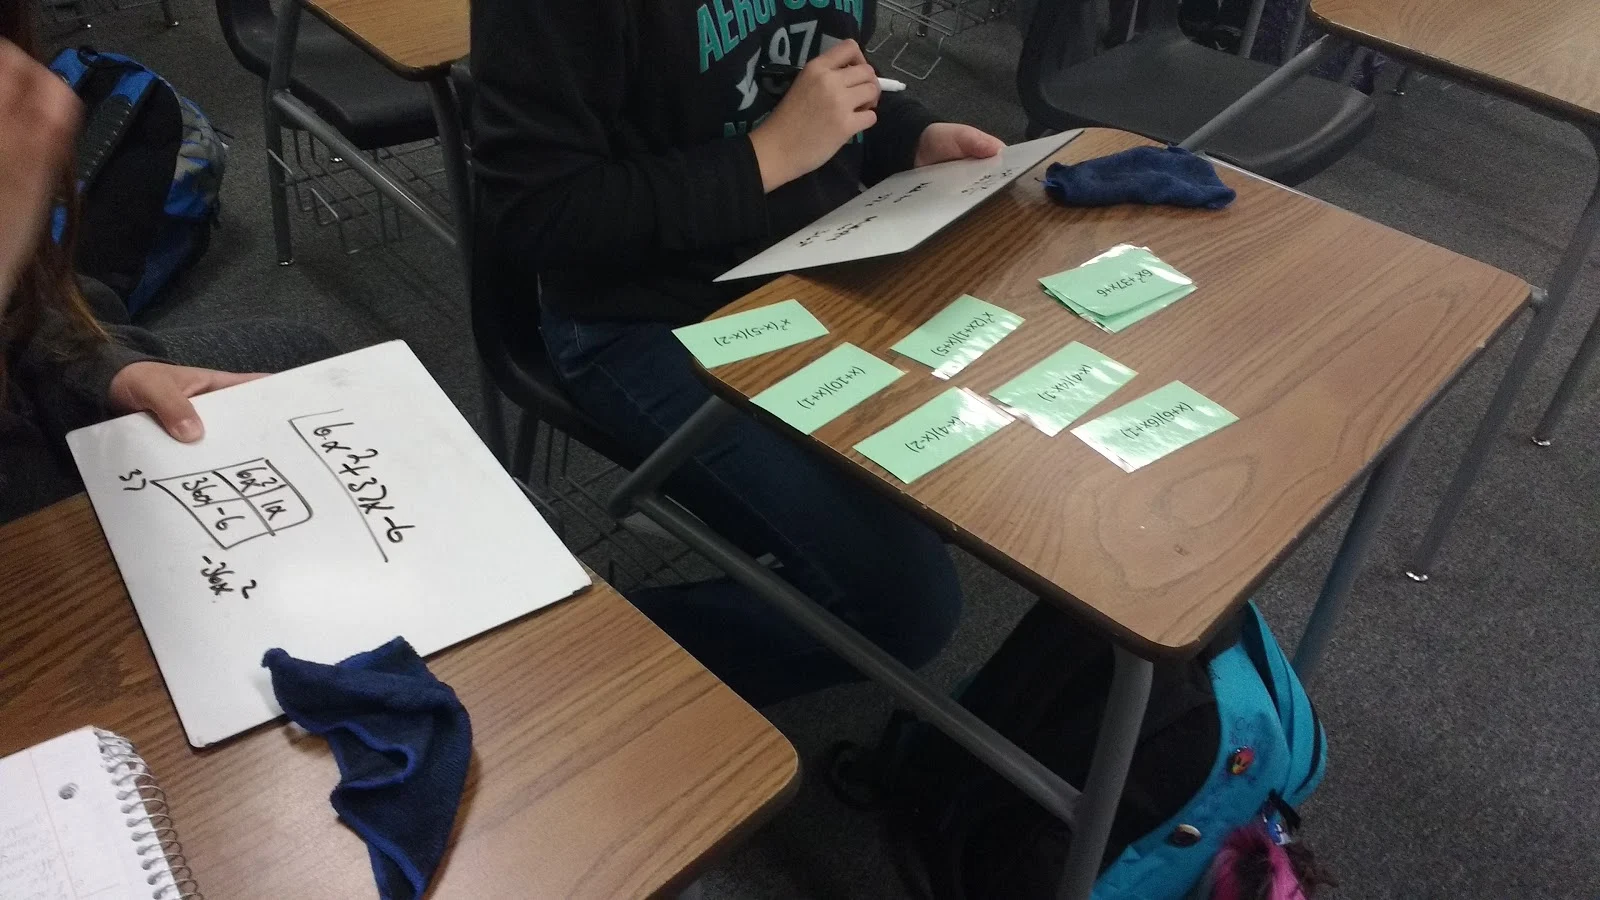 factoring trinomials with gcfs question stack activity 